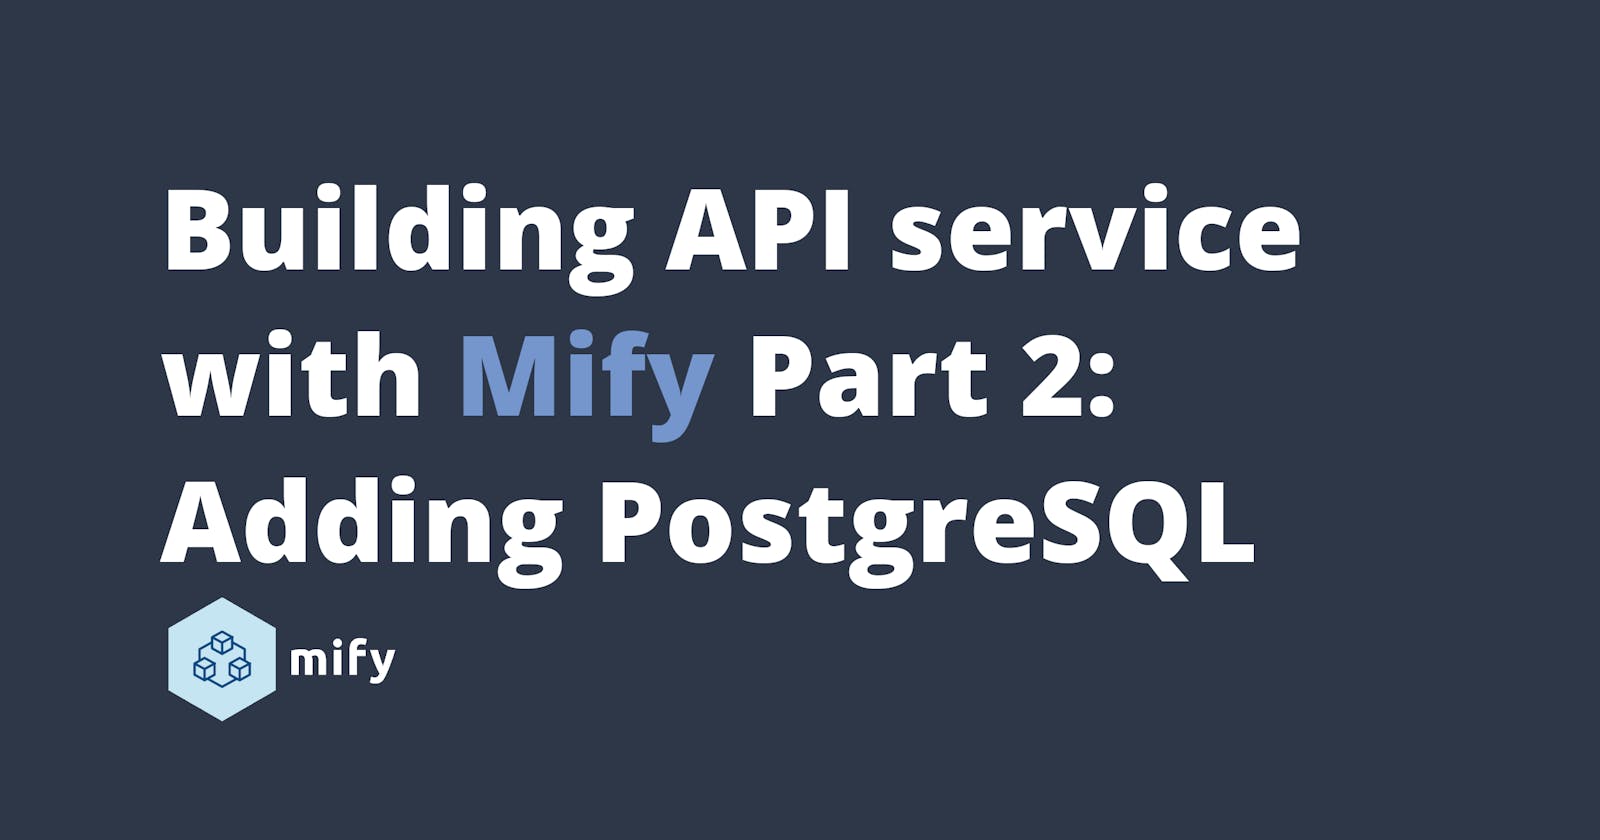 Building API service with Mify Part 2: Adding Postgres